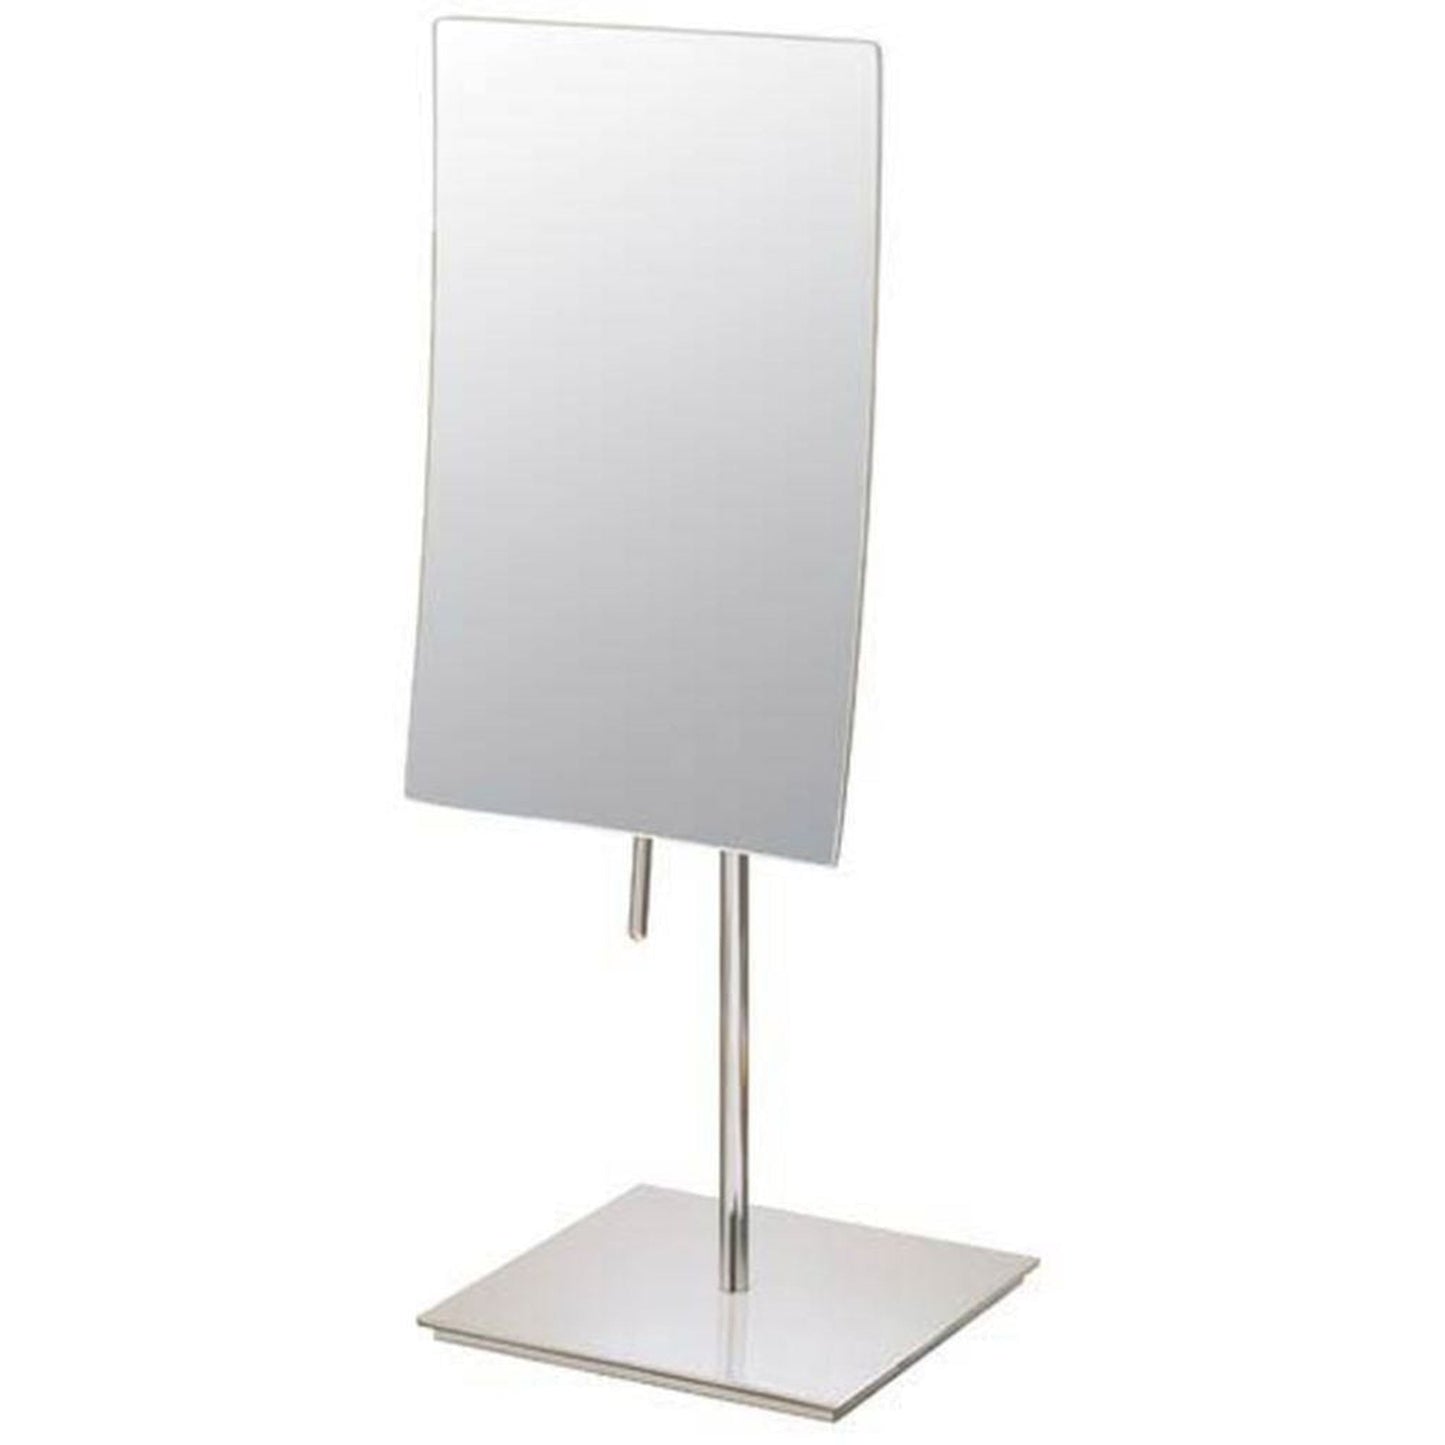 Aptations Mirror Image 5″ x 14" Brushed Nickel Freestanding Rectangular Minimalist 3X Magnified Mirror With Square Base